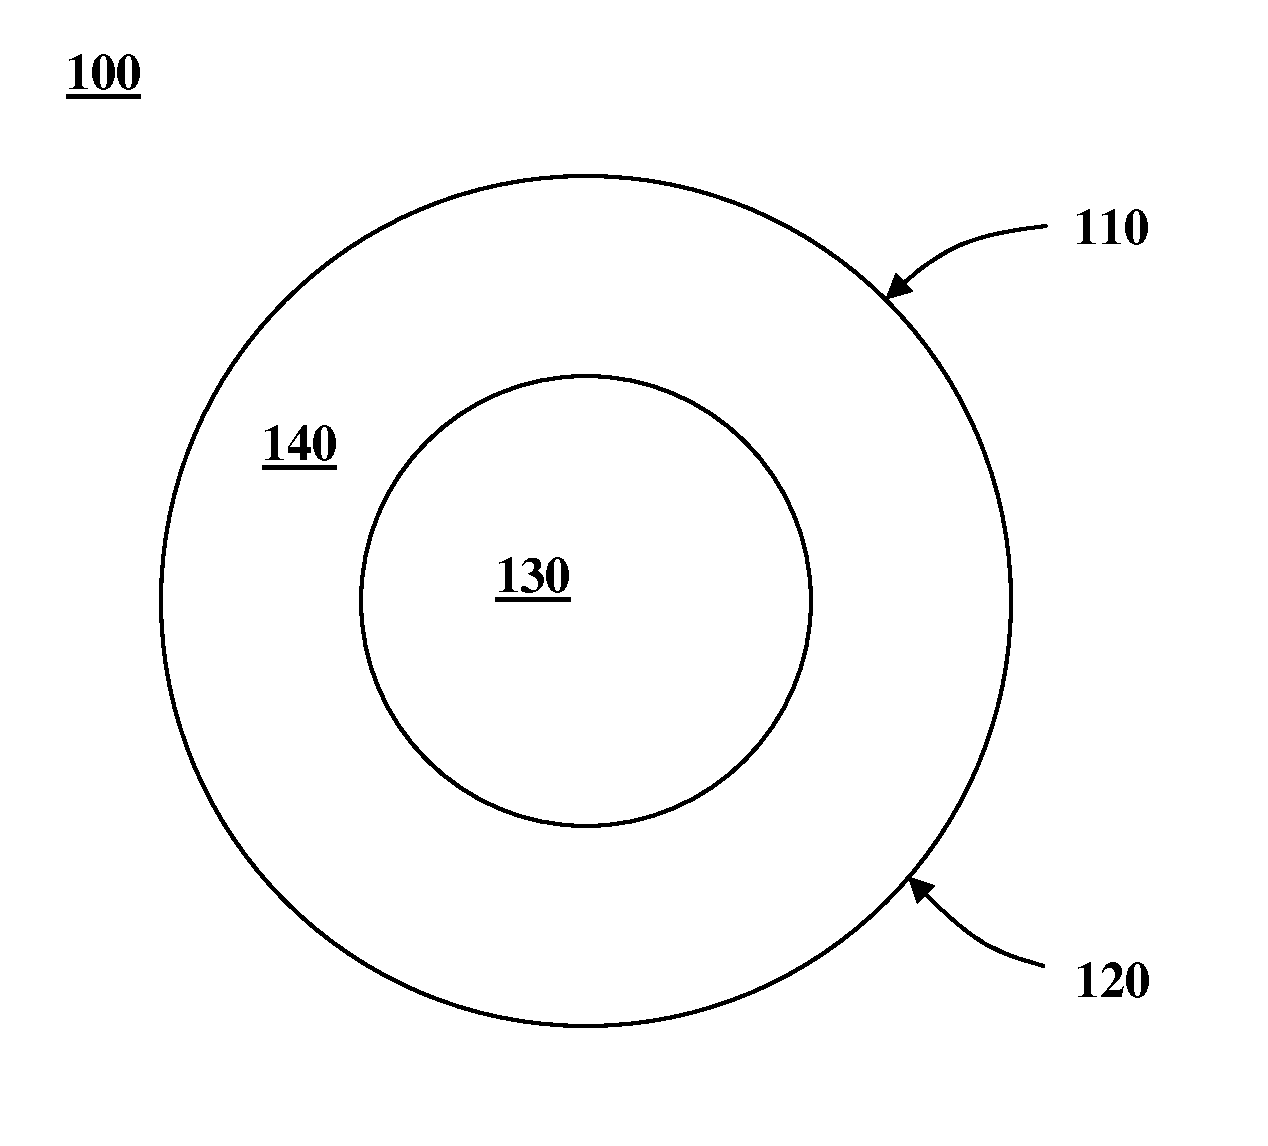 Polymer compositions suitable for intraocular lenses and related methods